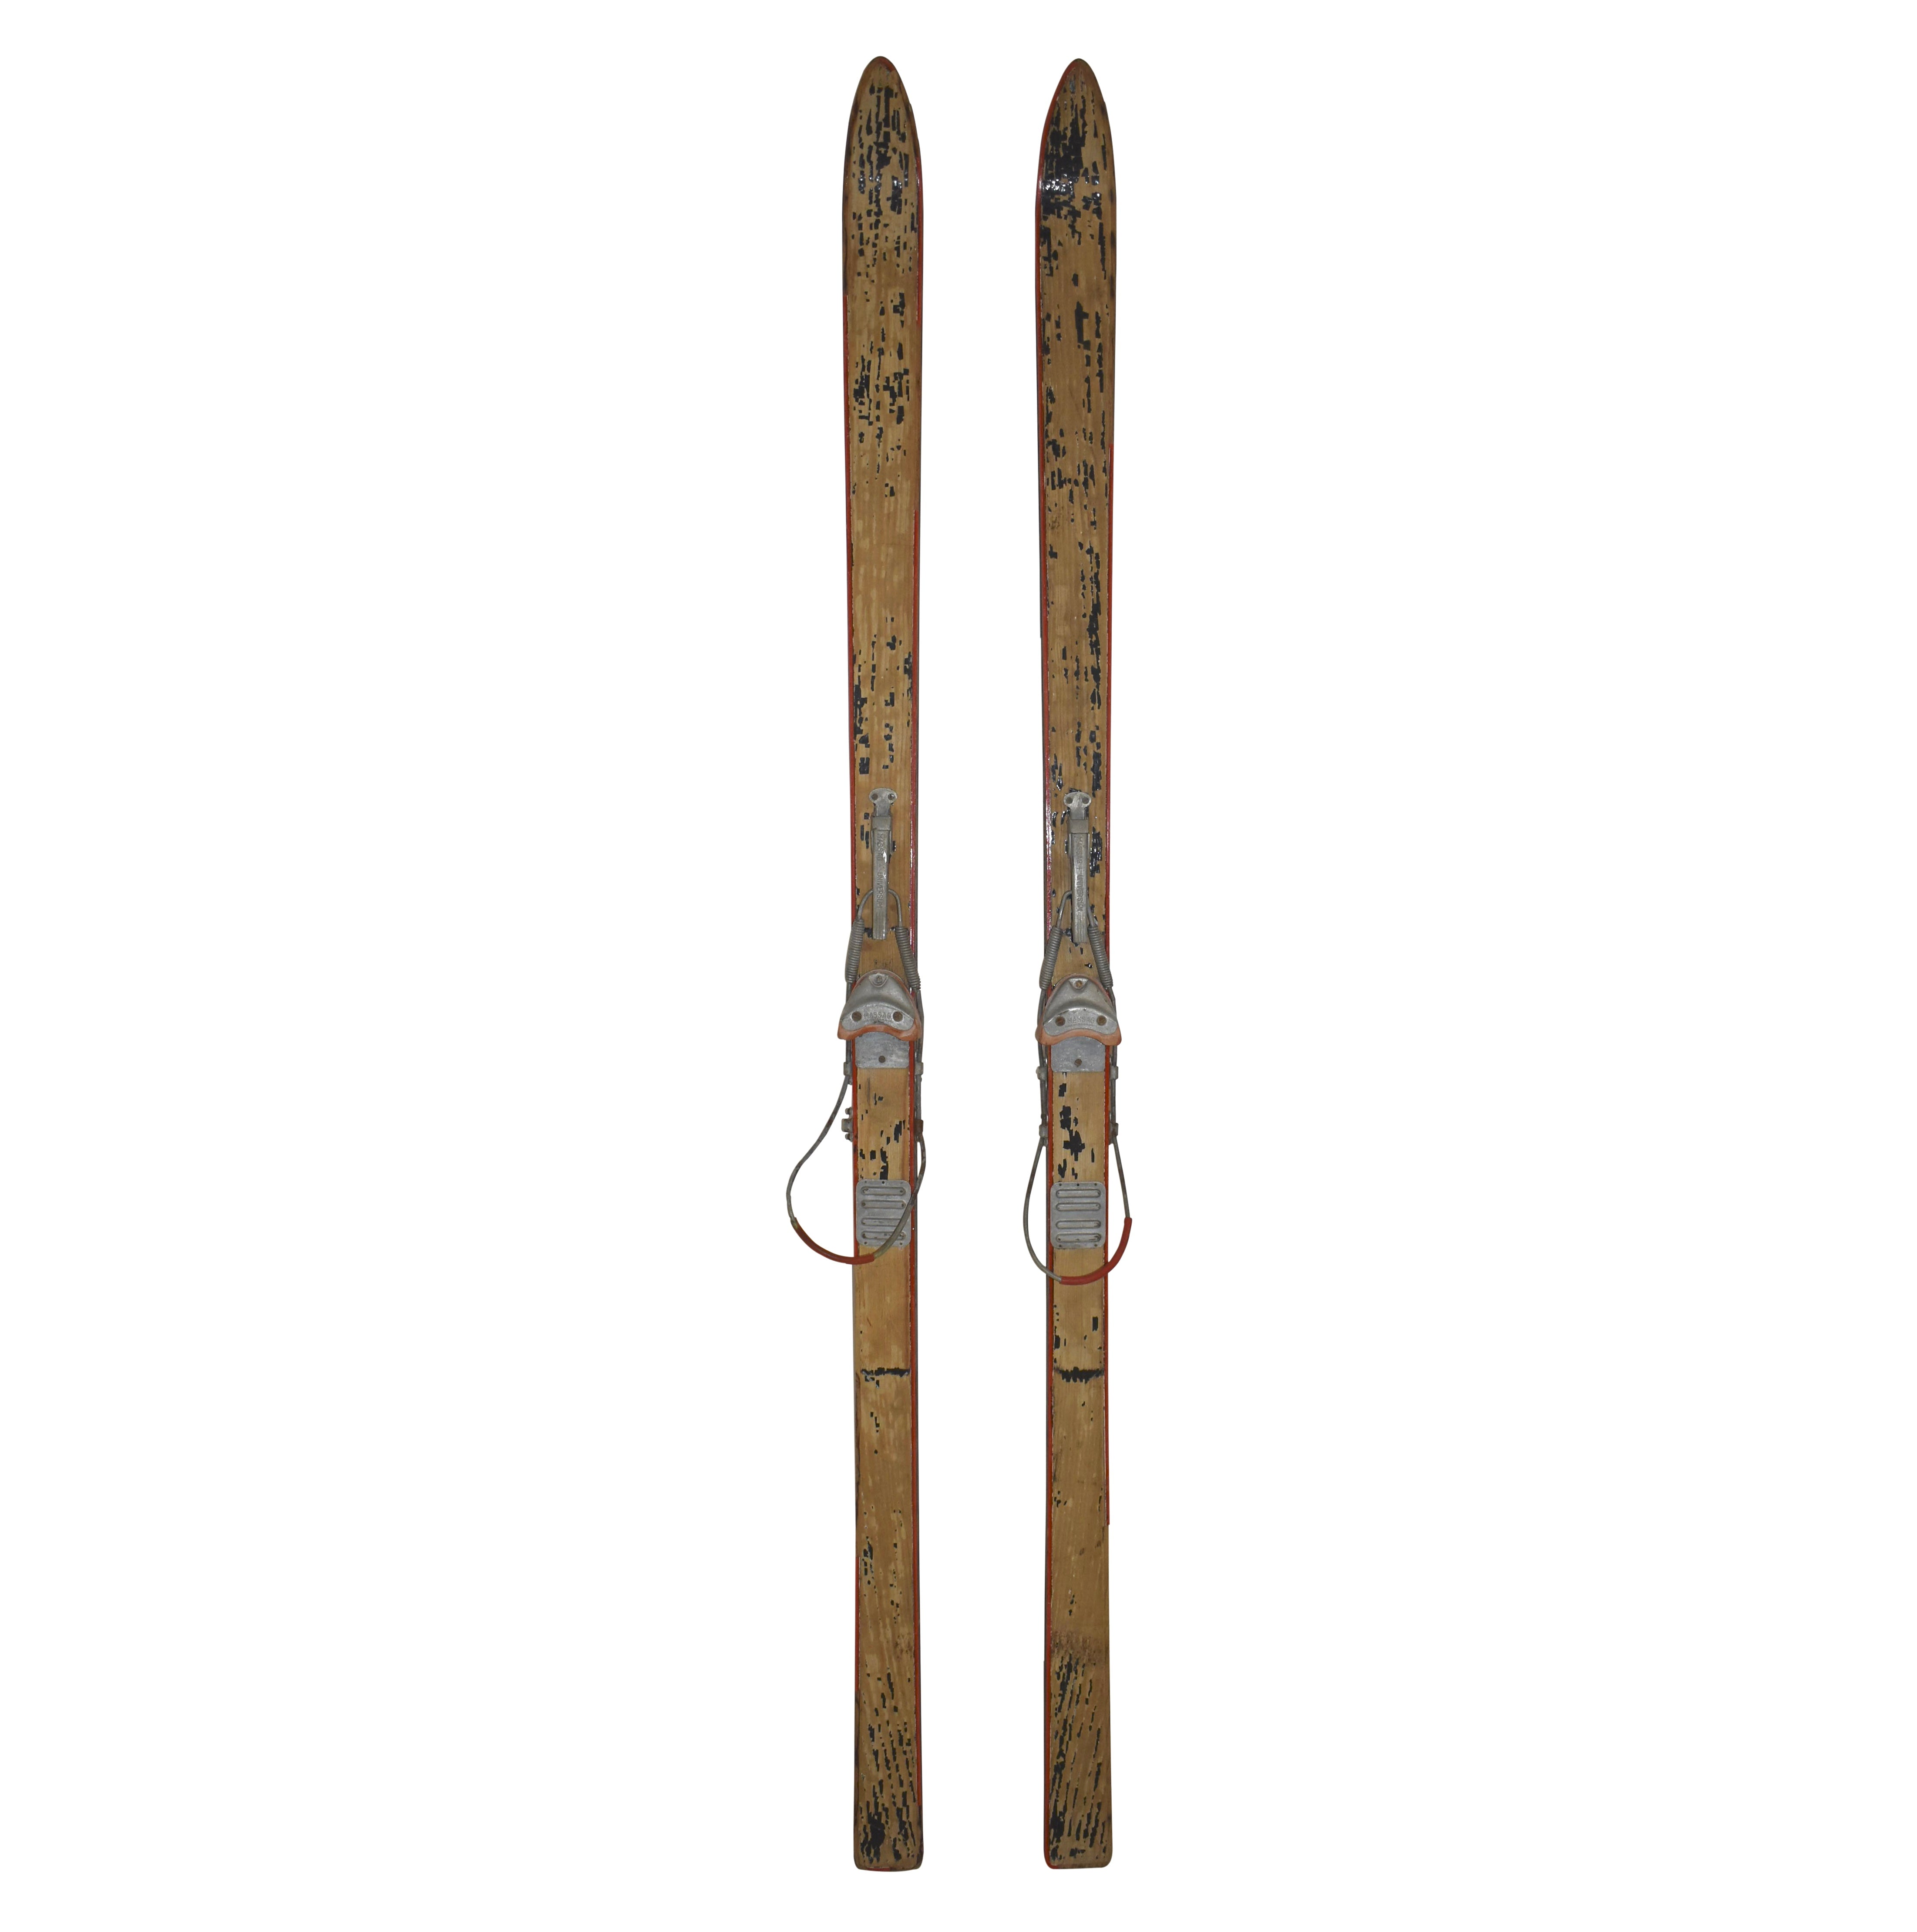 Wooden Skis with Massag Cable Bindings